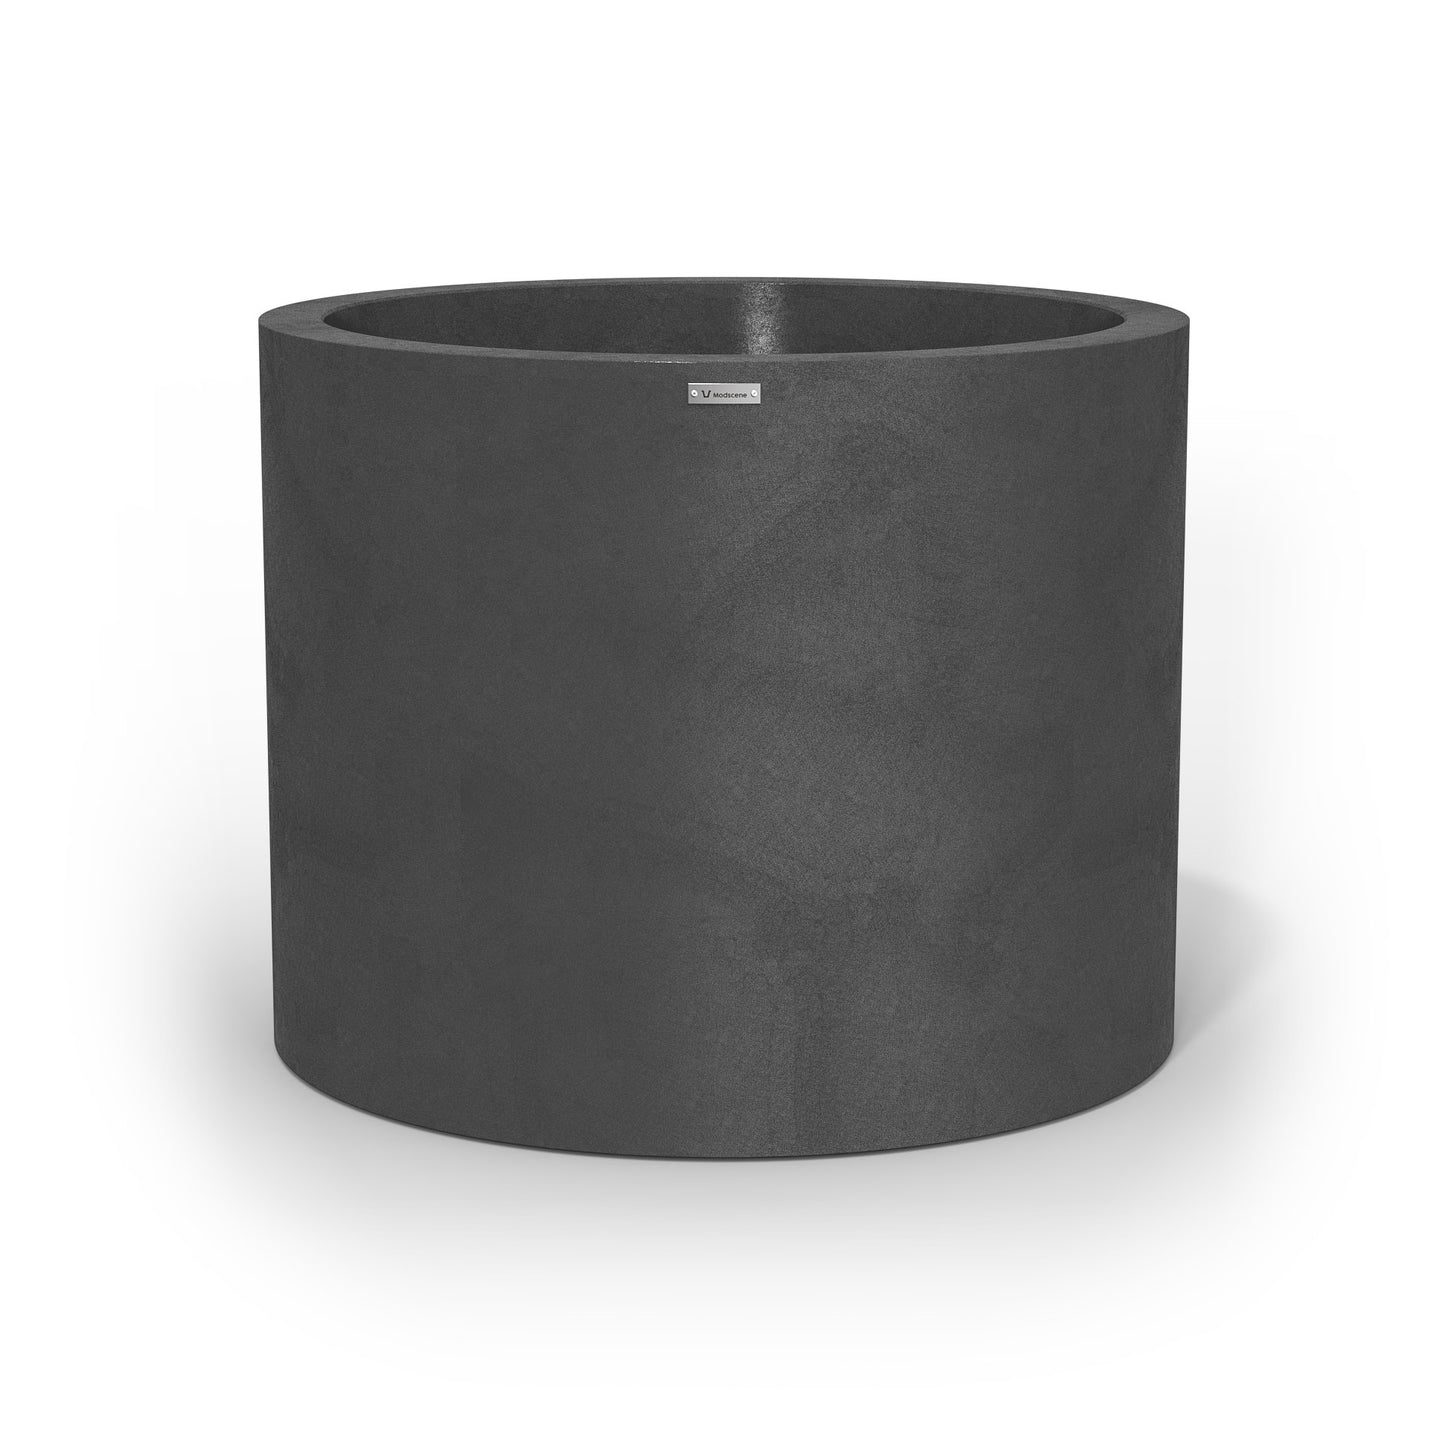 An extra large cylinder pot planter in a brushed grey colour. Made by Modscene NZ.